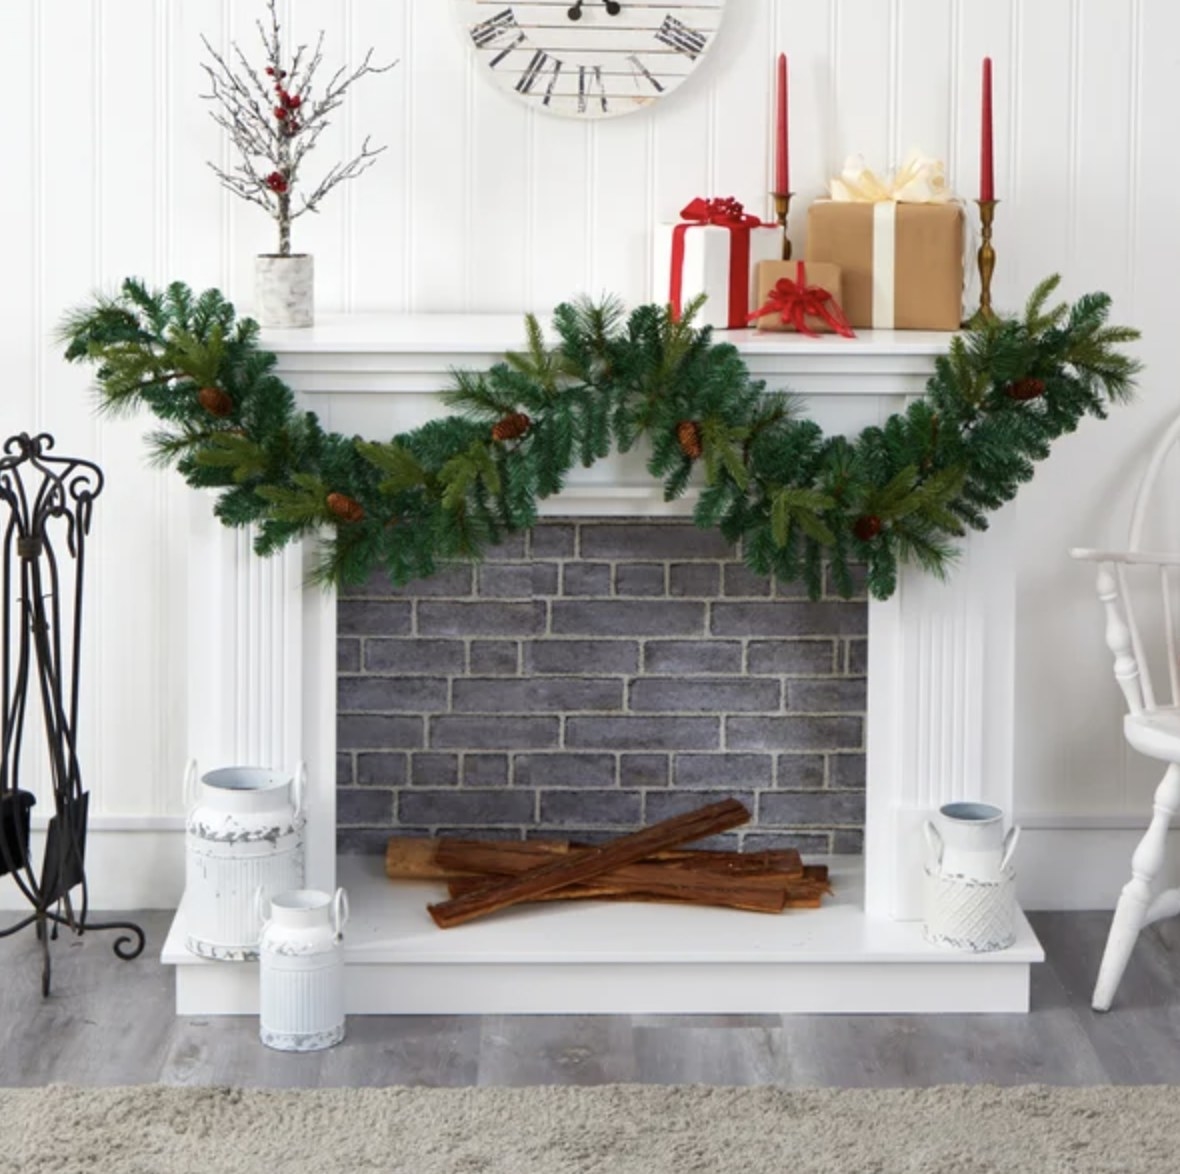 The green garland with pinecones is hung on top of the mantle of a white fireplace